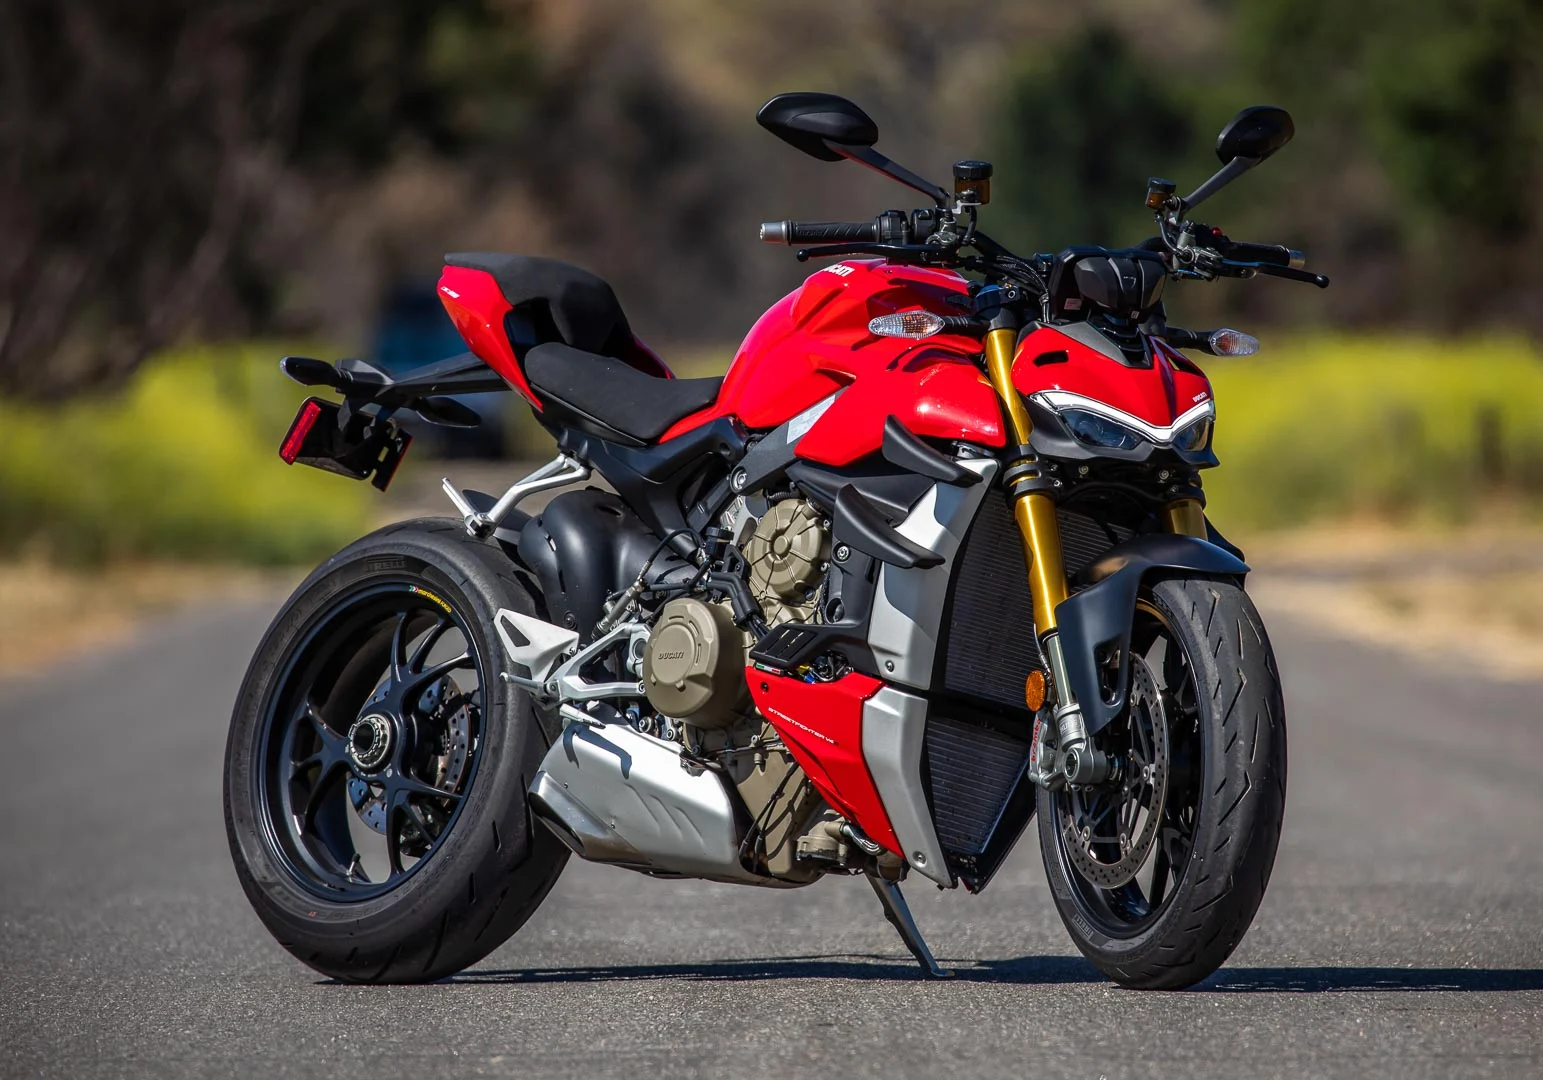 2020-Ducati-Streetfighter-V4-S-Review-naked-upgright-sport-motorcycle-7.webp